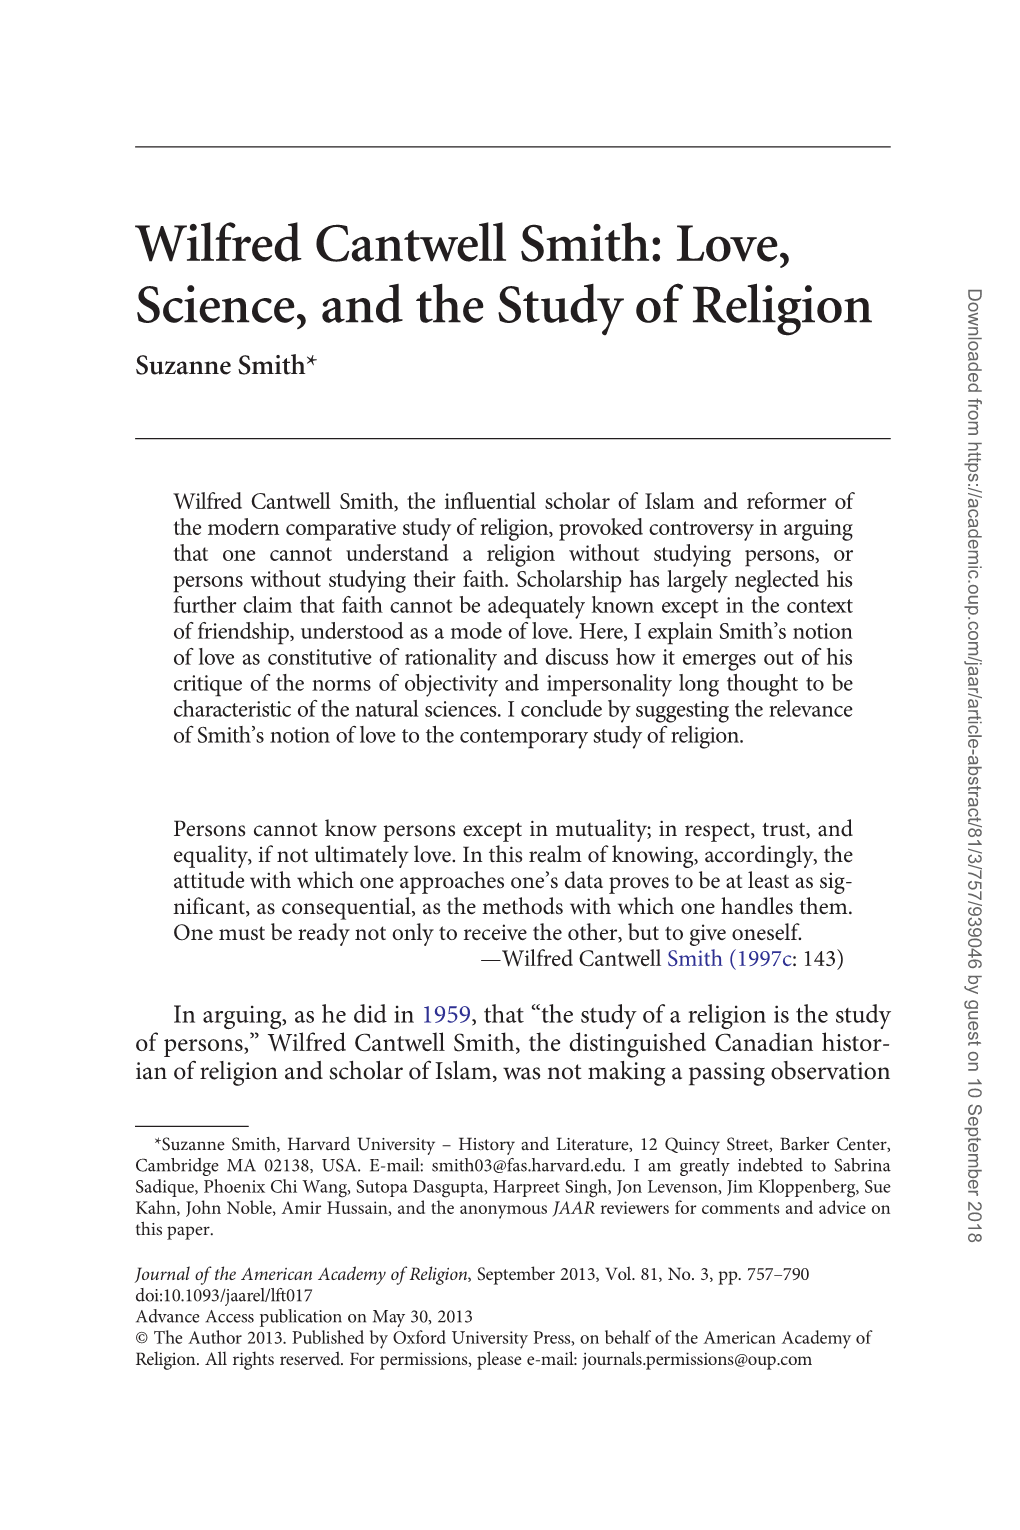 Wilfred Cantwell Smith: Love, Science, and the Study of Religion